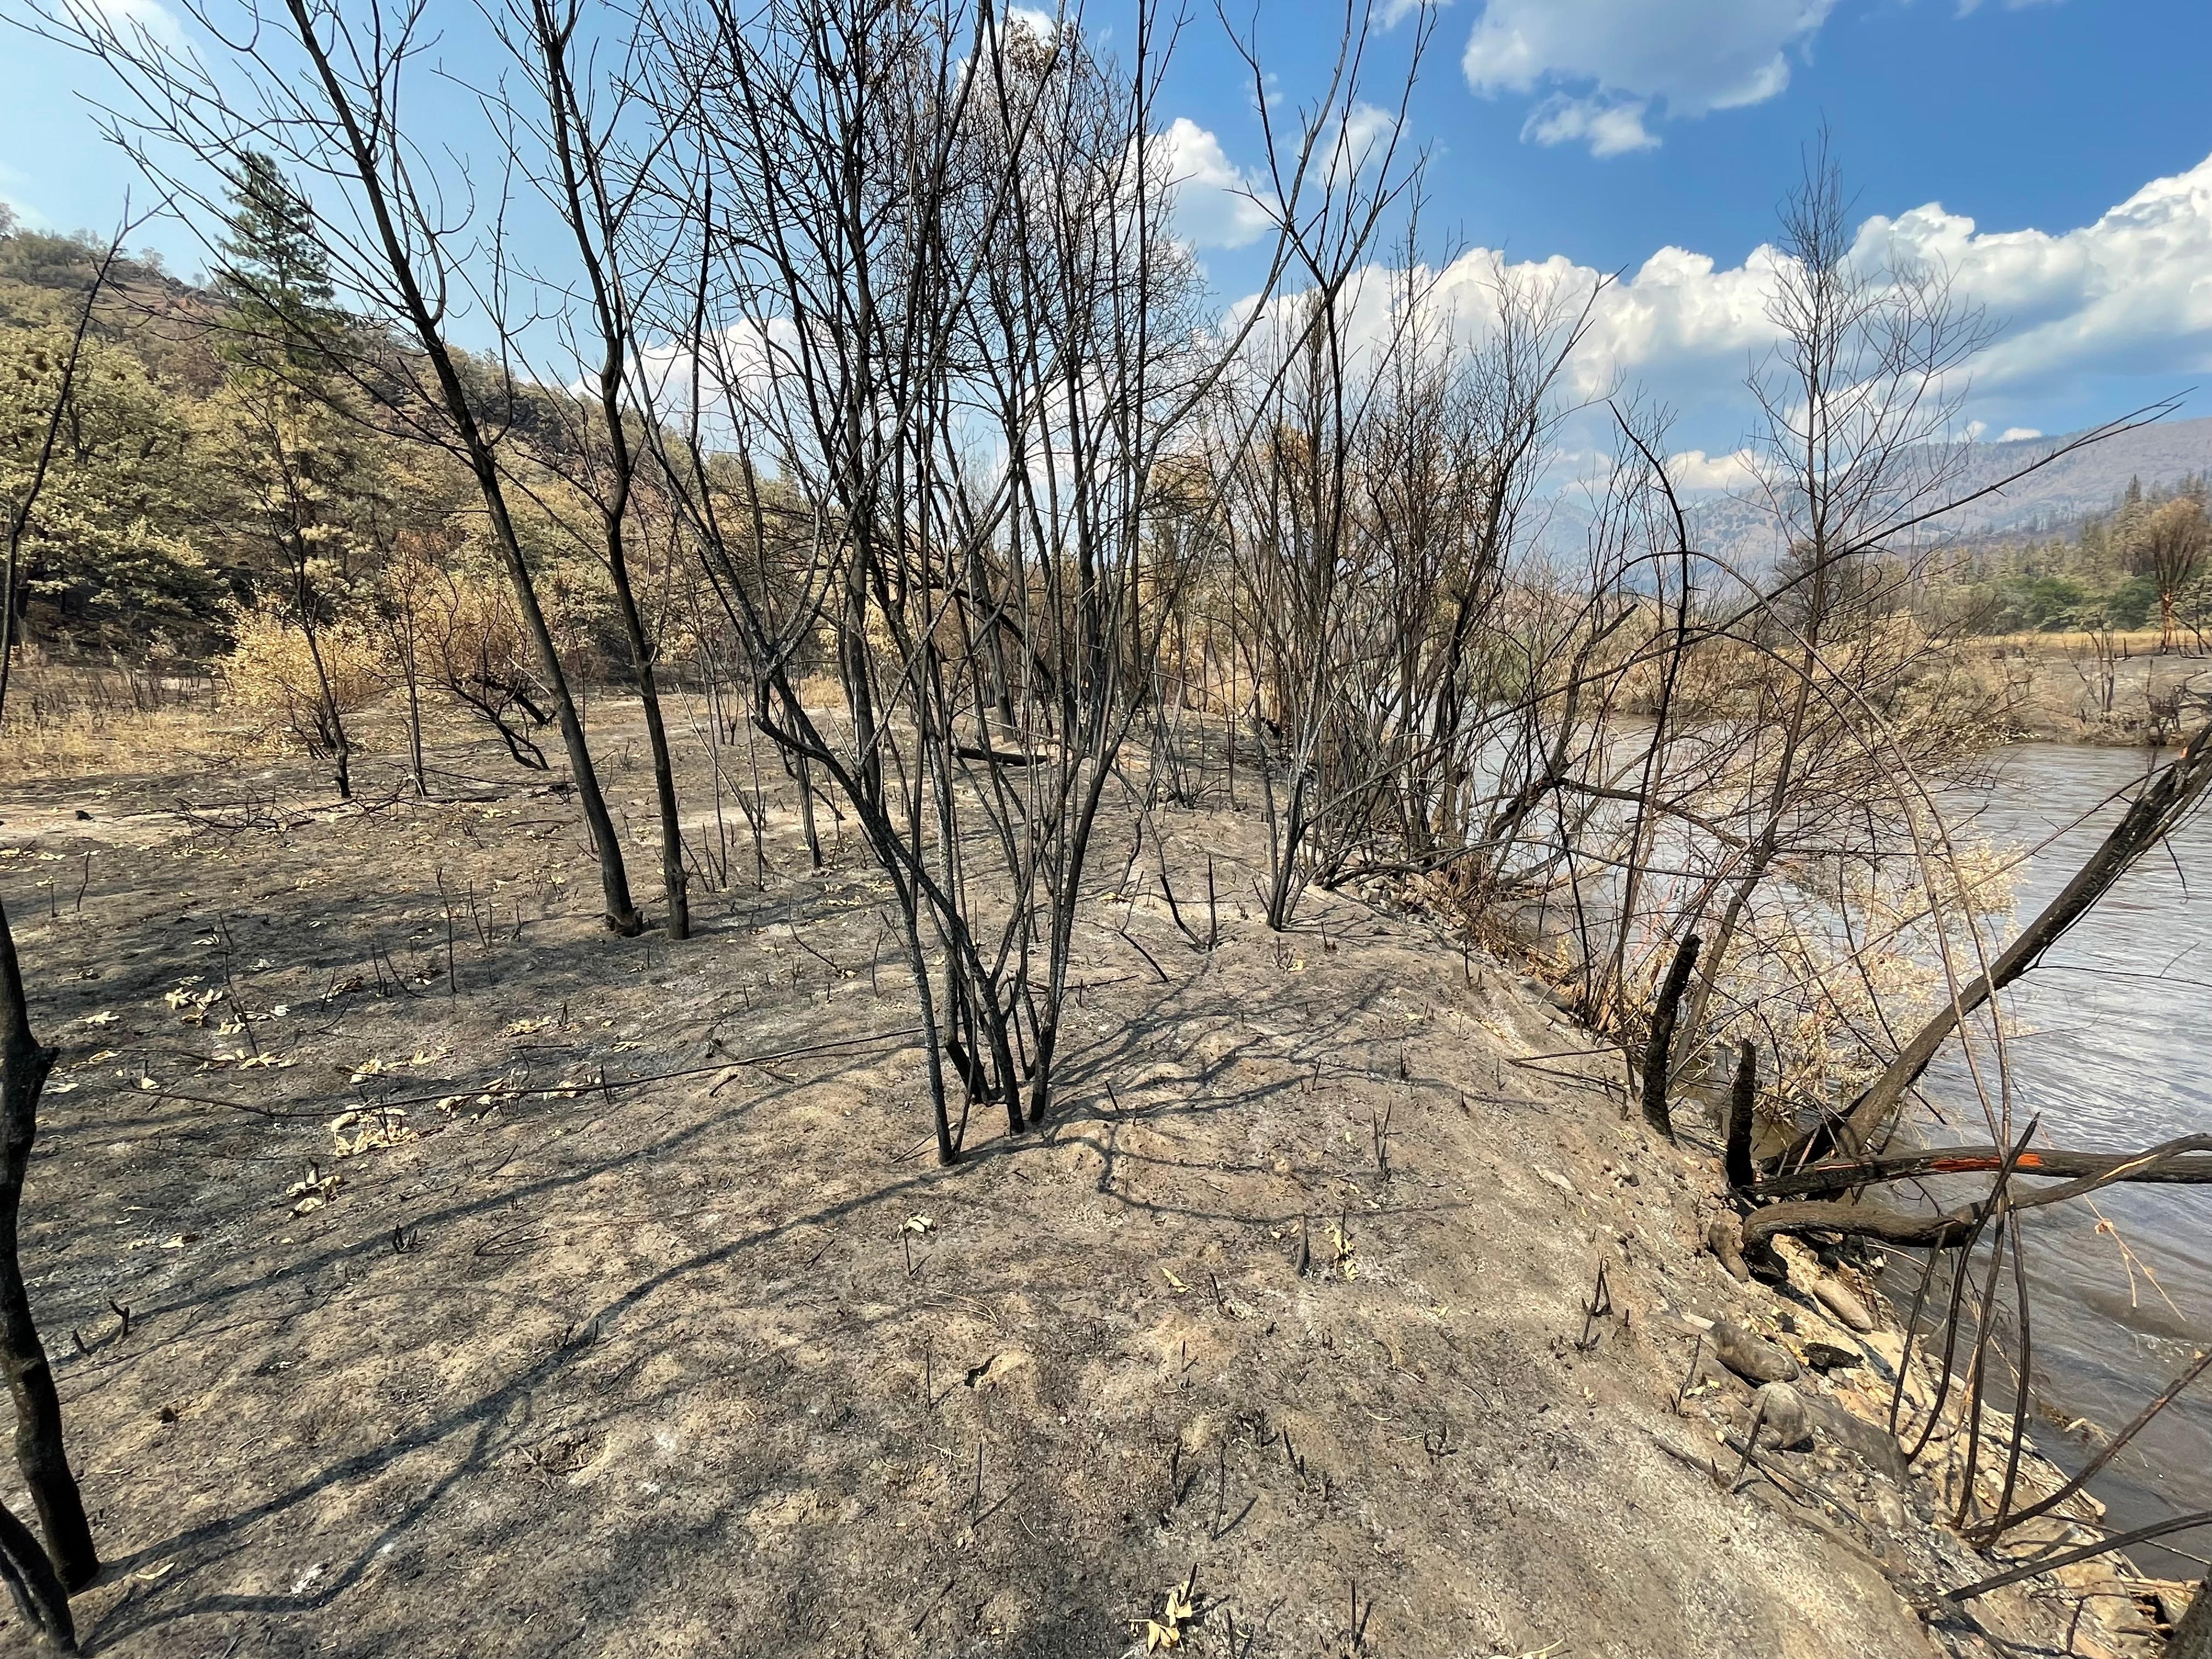 The Klamath River acted as a natural barrier for a portion of the fire 